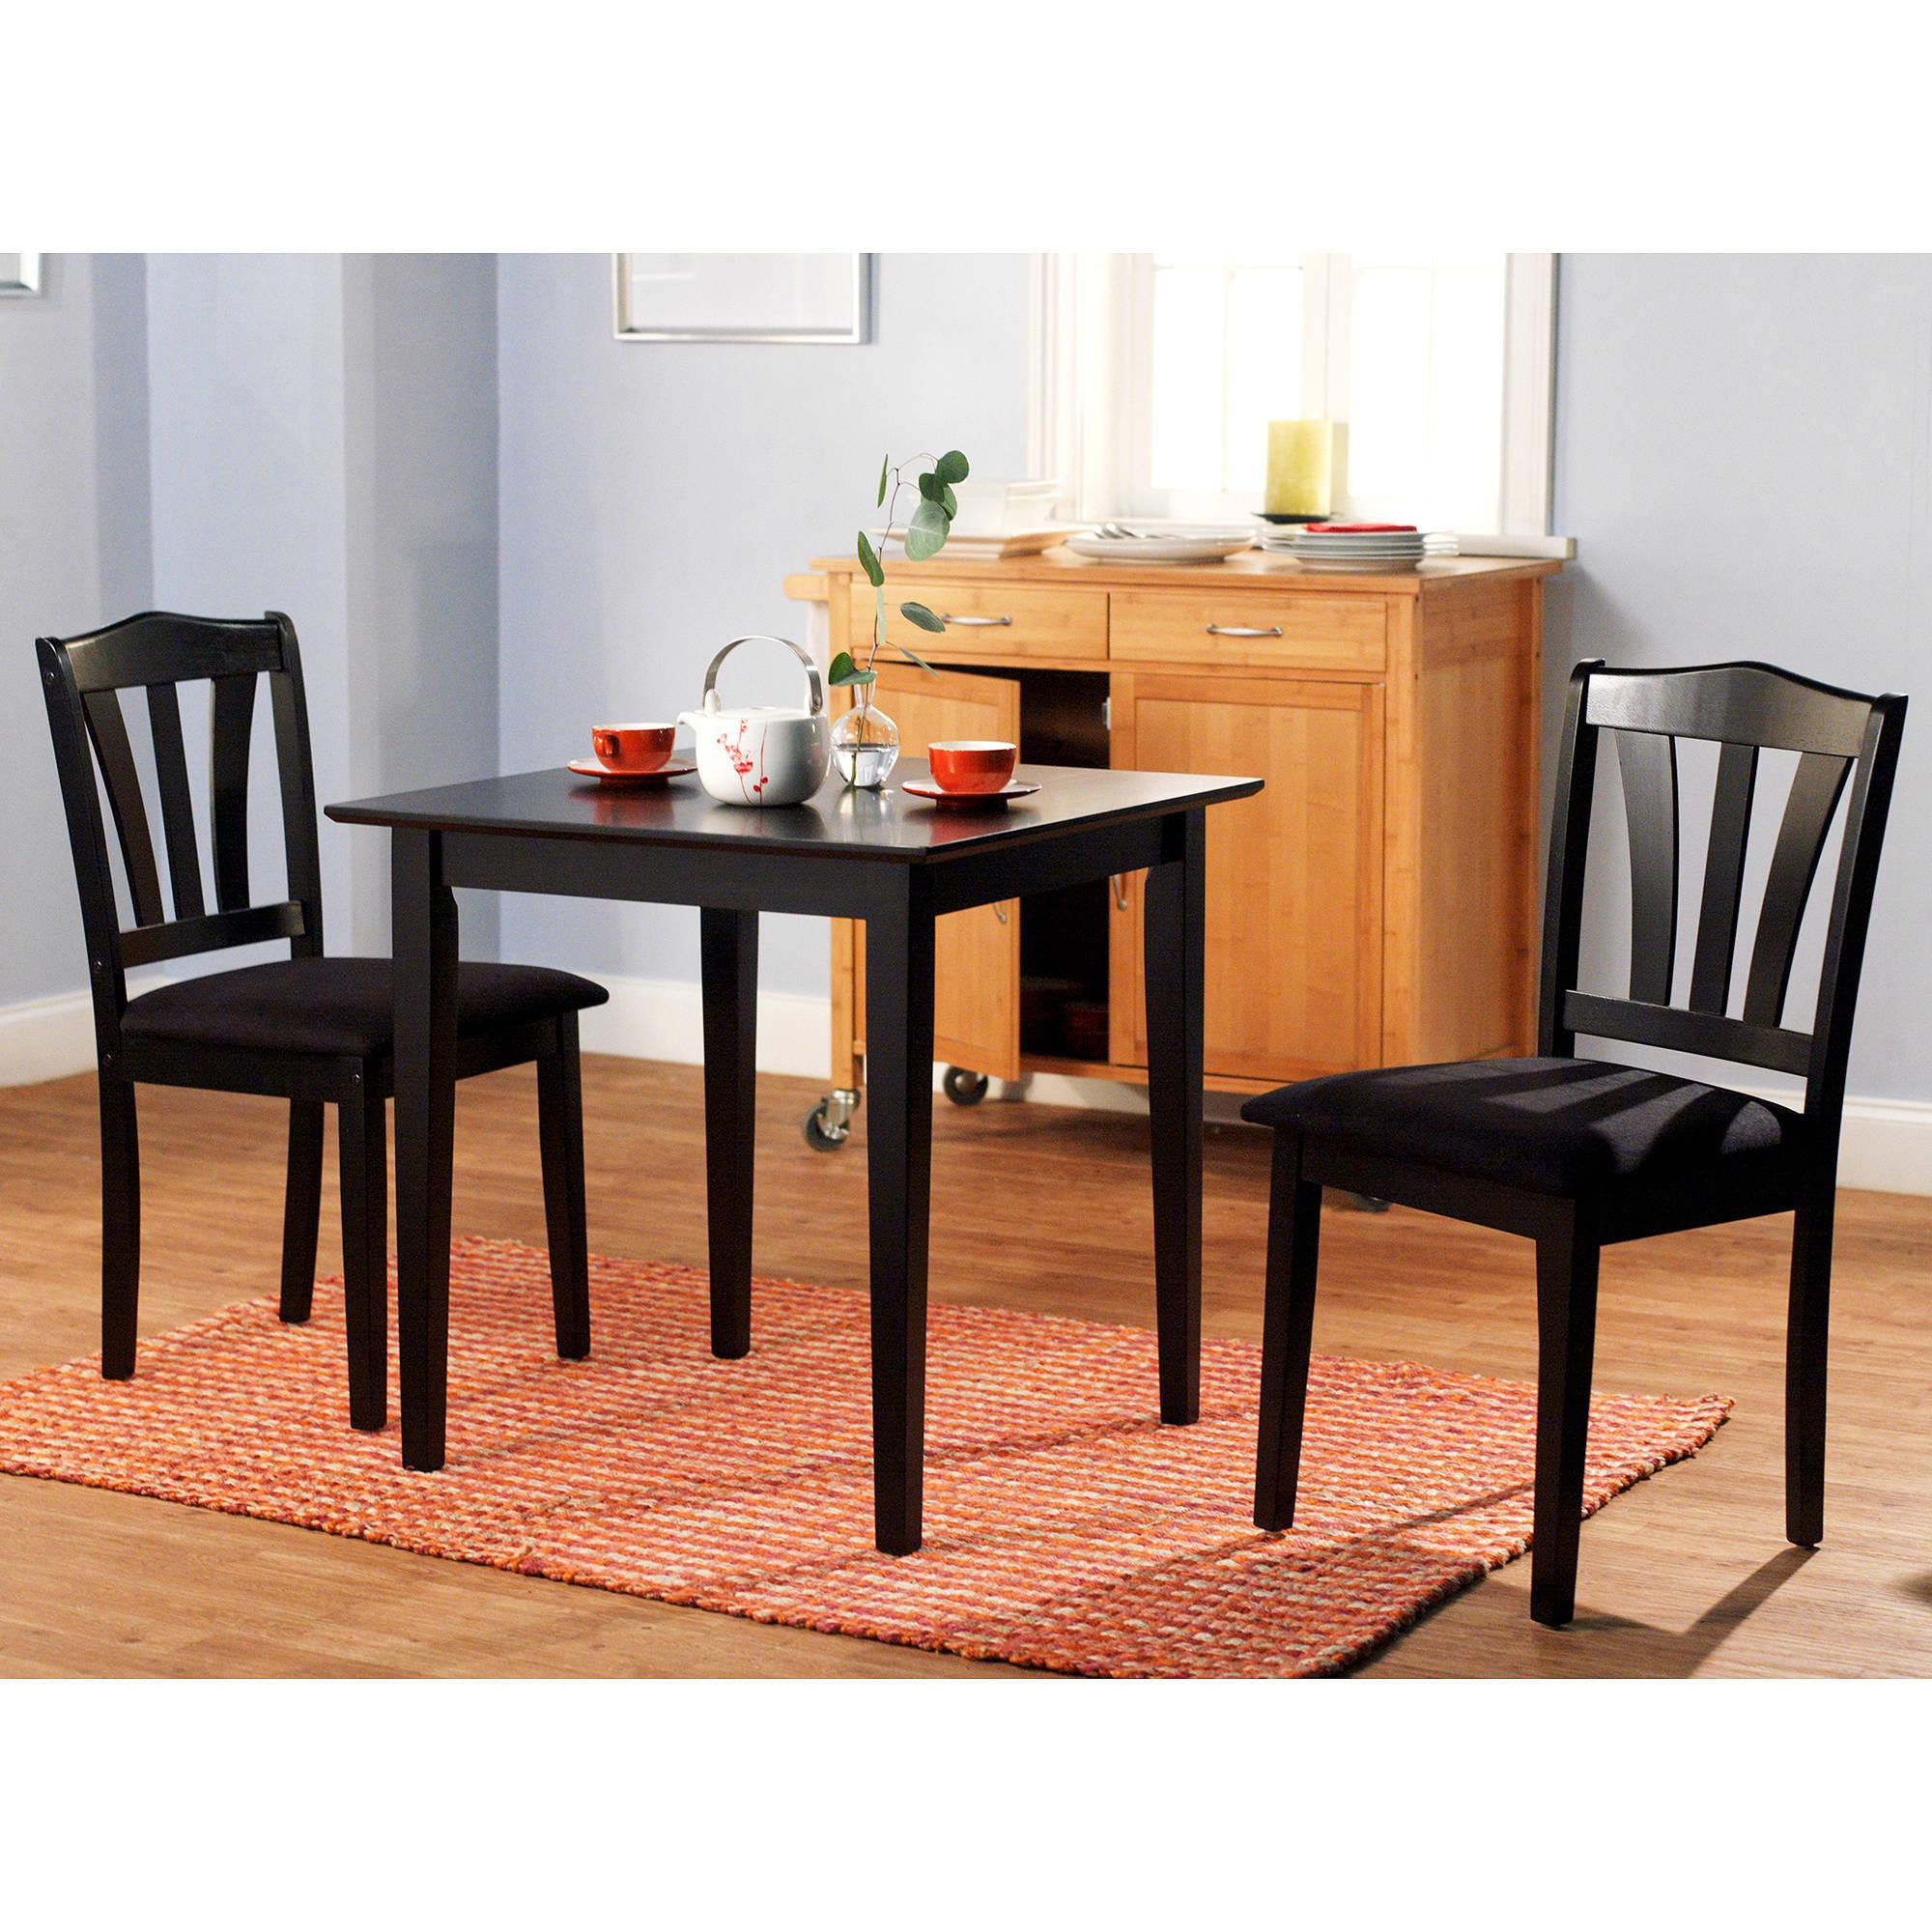 Small Kitchen Dinette Set
 3 Piece Dining Set Table 2 Chairs Kitchen Room Wood